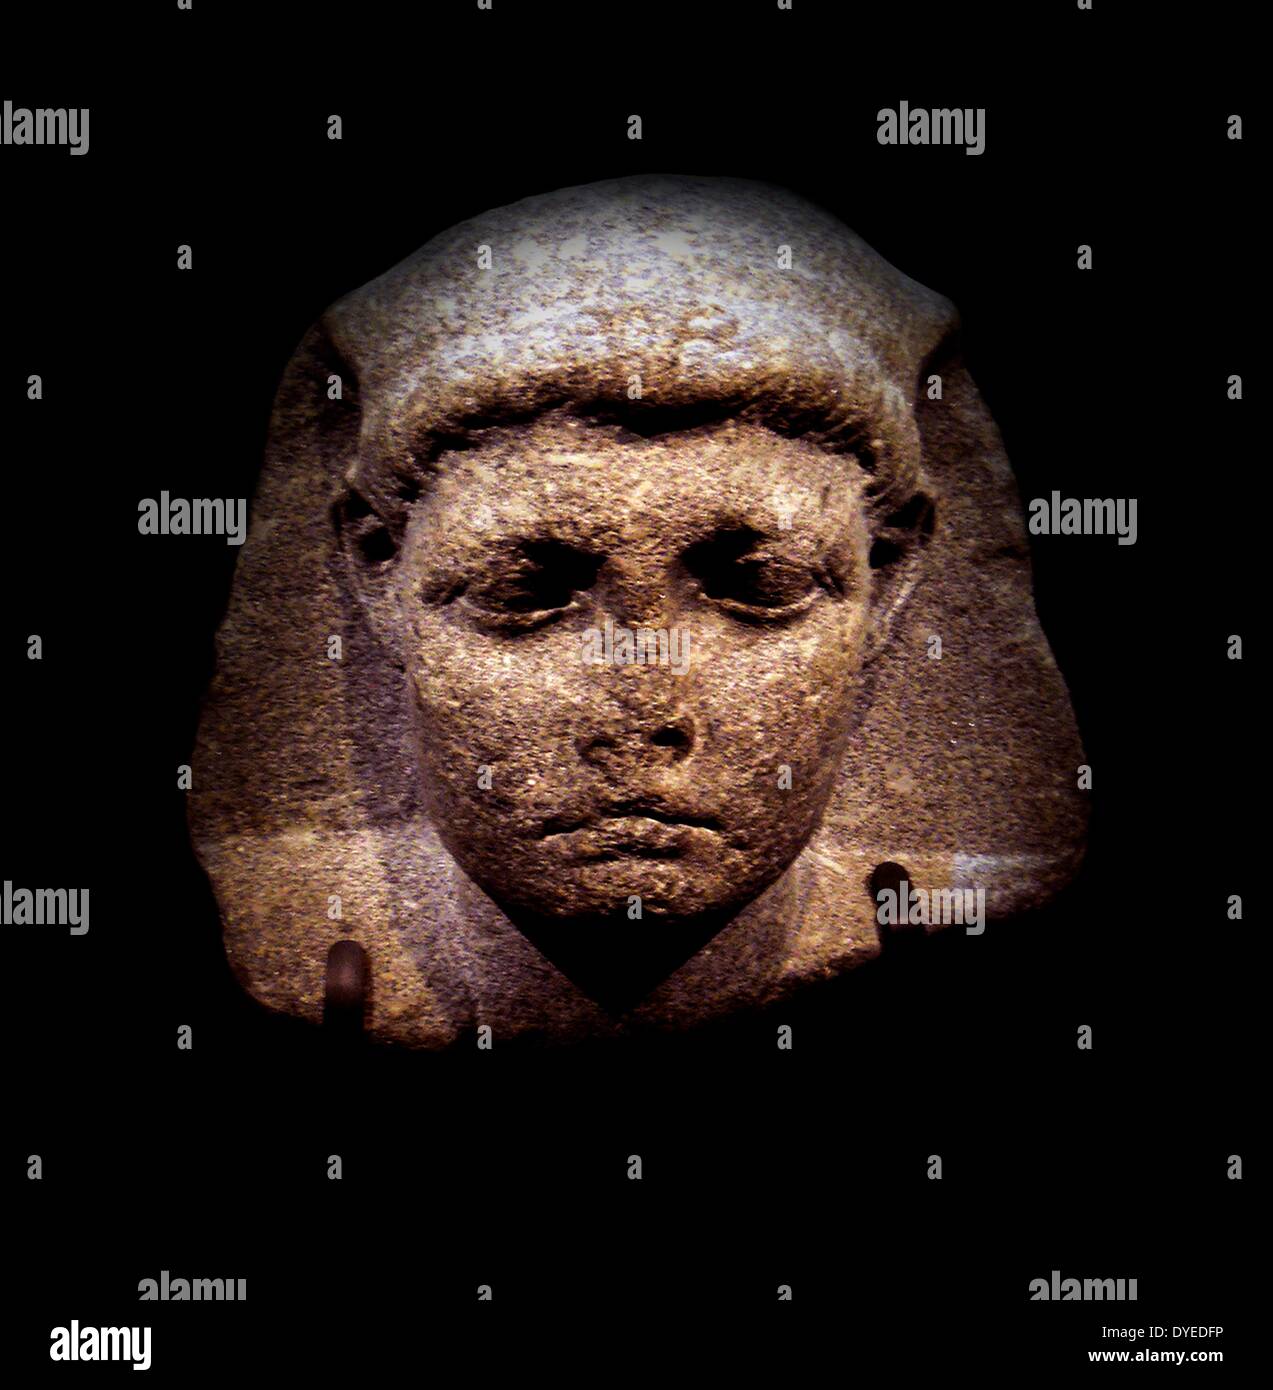 Ptolemy xii hi-res stock photography and images - Alamy